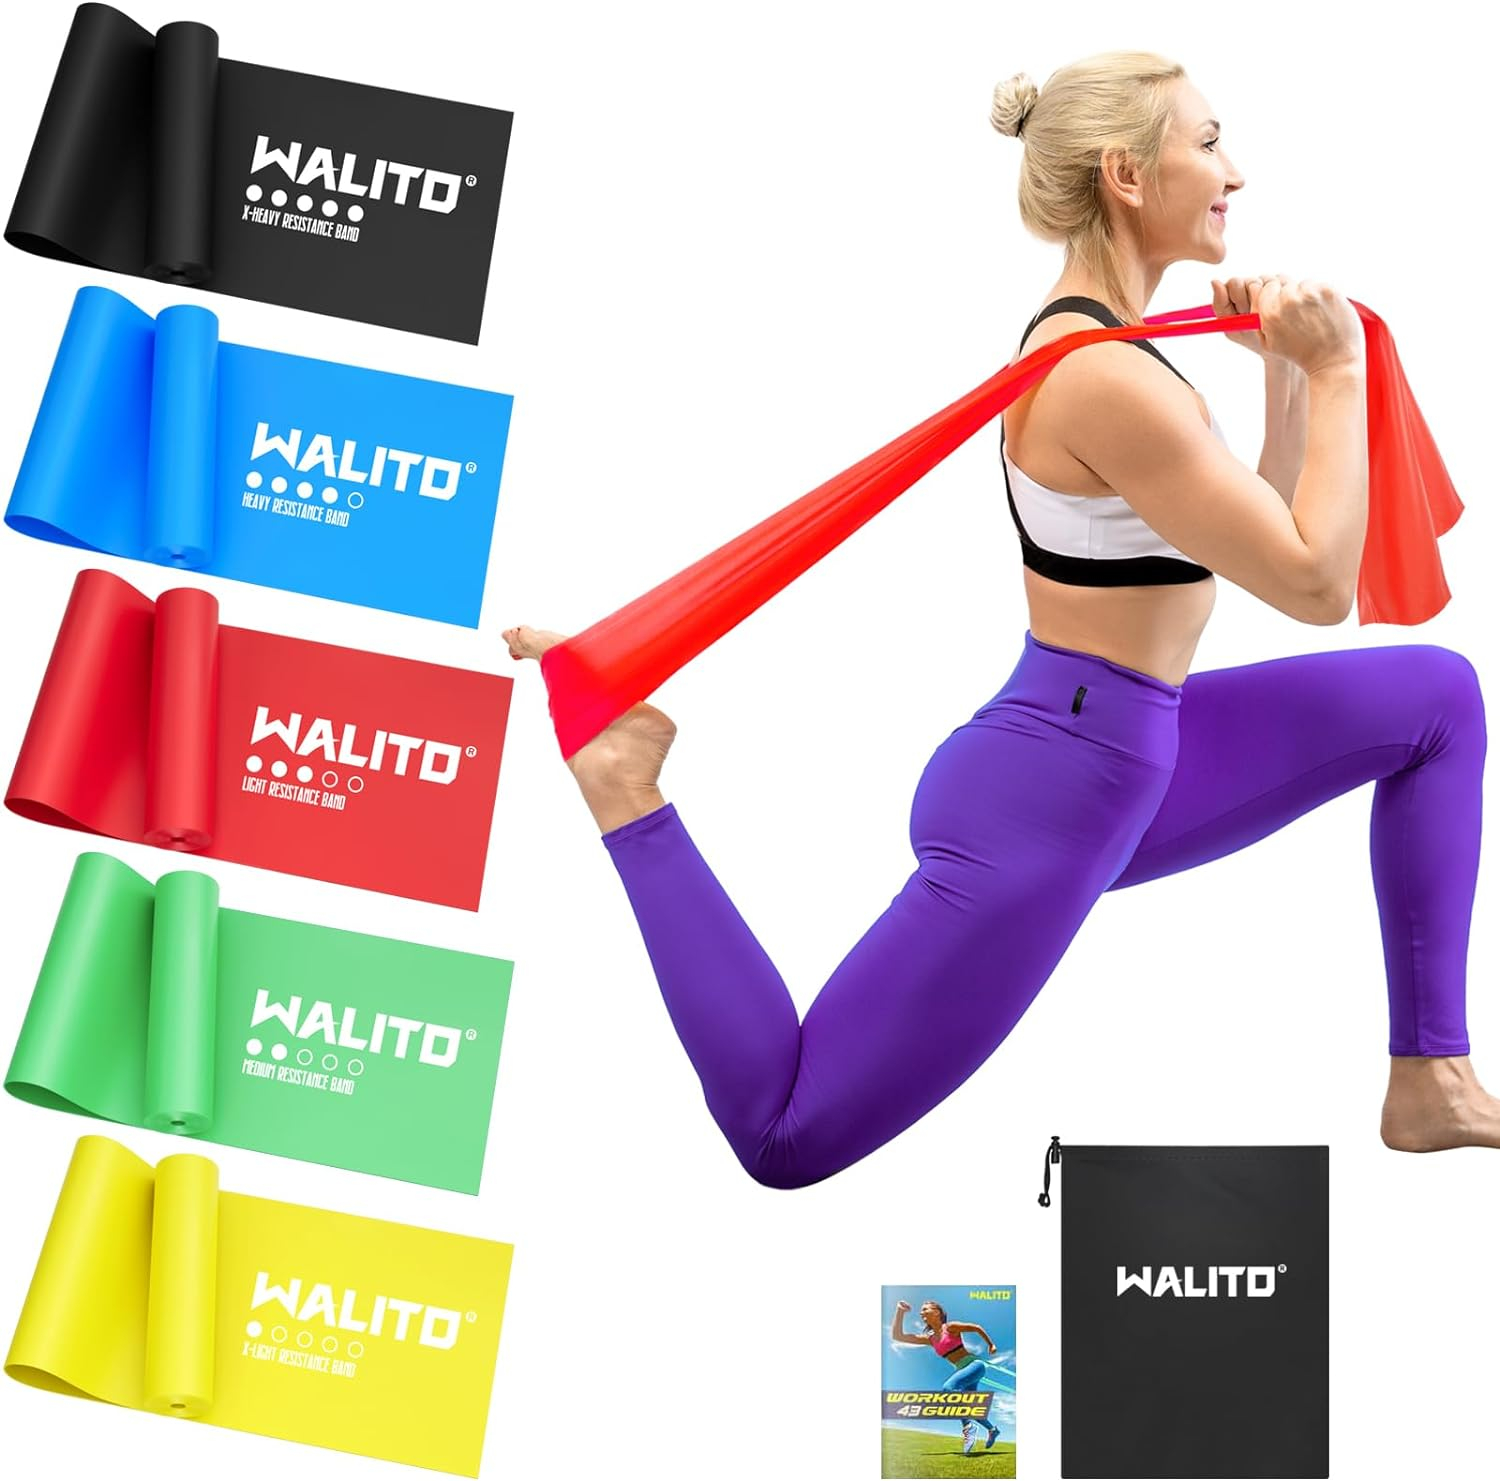 Walito Exercise Bands, Extra Long Physical Therapy Band, Non-Latex Resistance Bands for Home Exercise, Workout, Strength Training, Yoga, Pilates, Rehab, Gym, Elastic Band for Upper and Lower Body